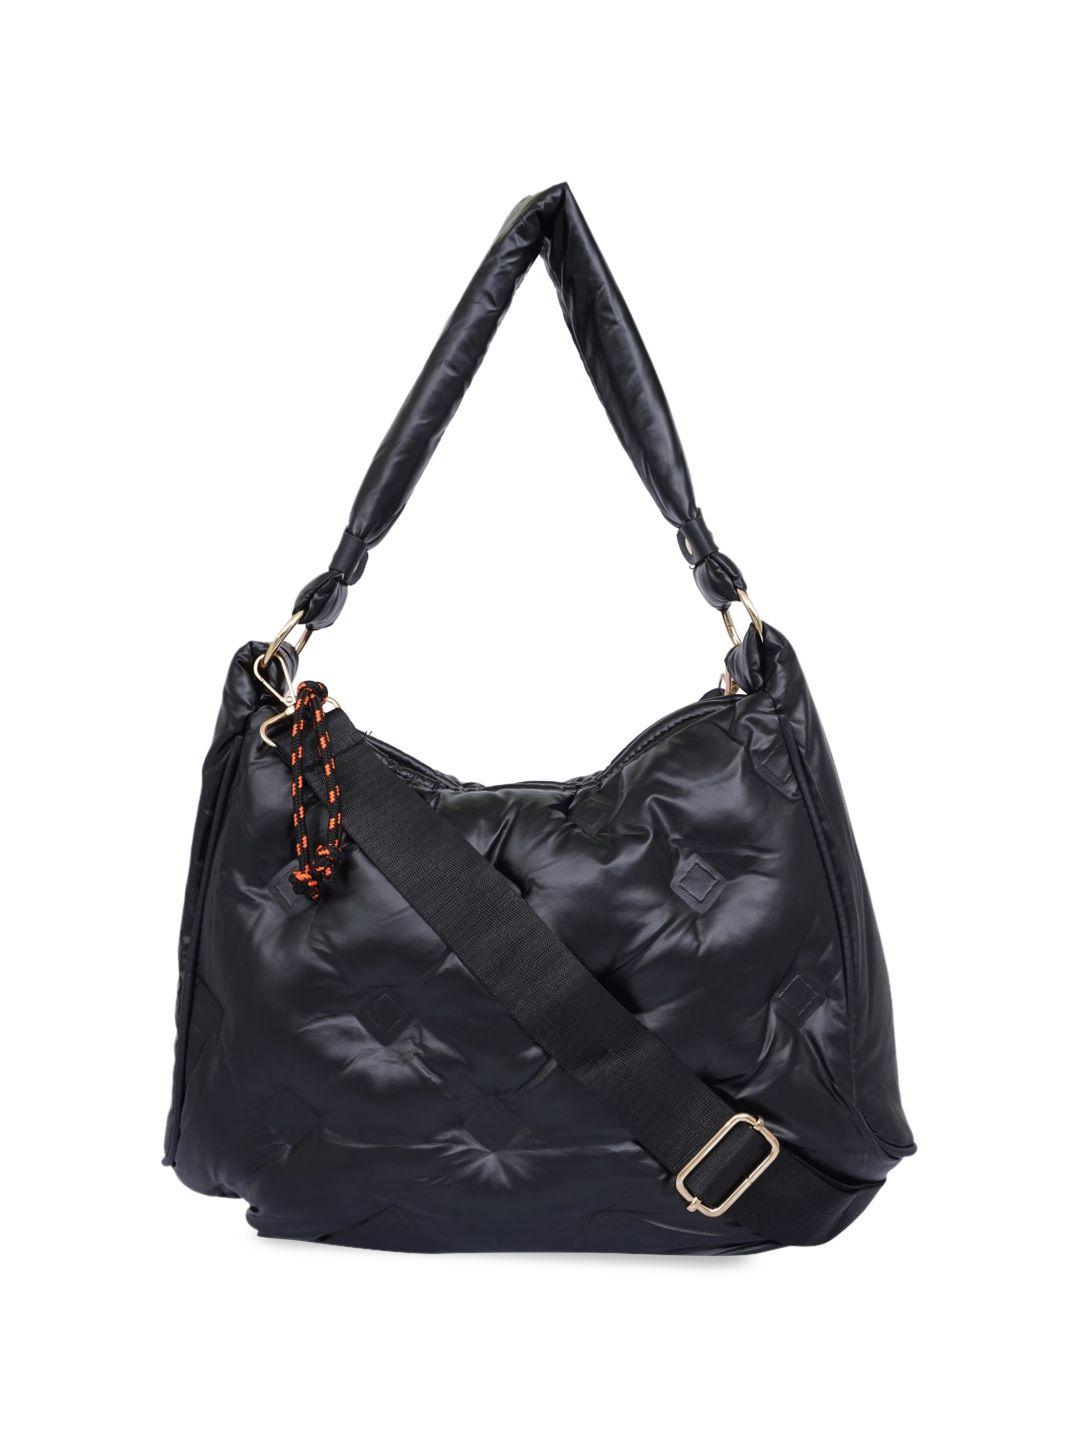 chronicle structured hobo bag